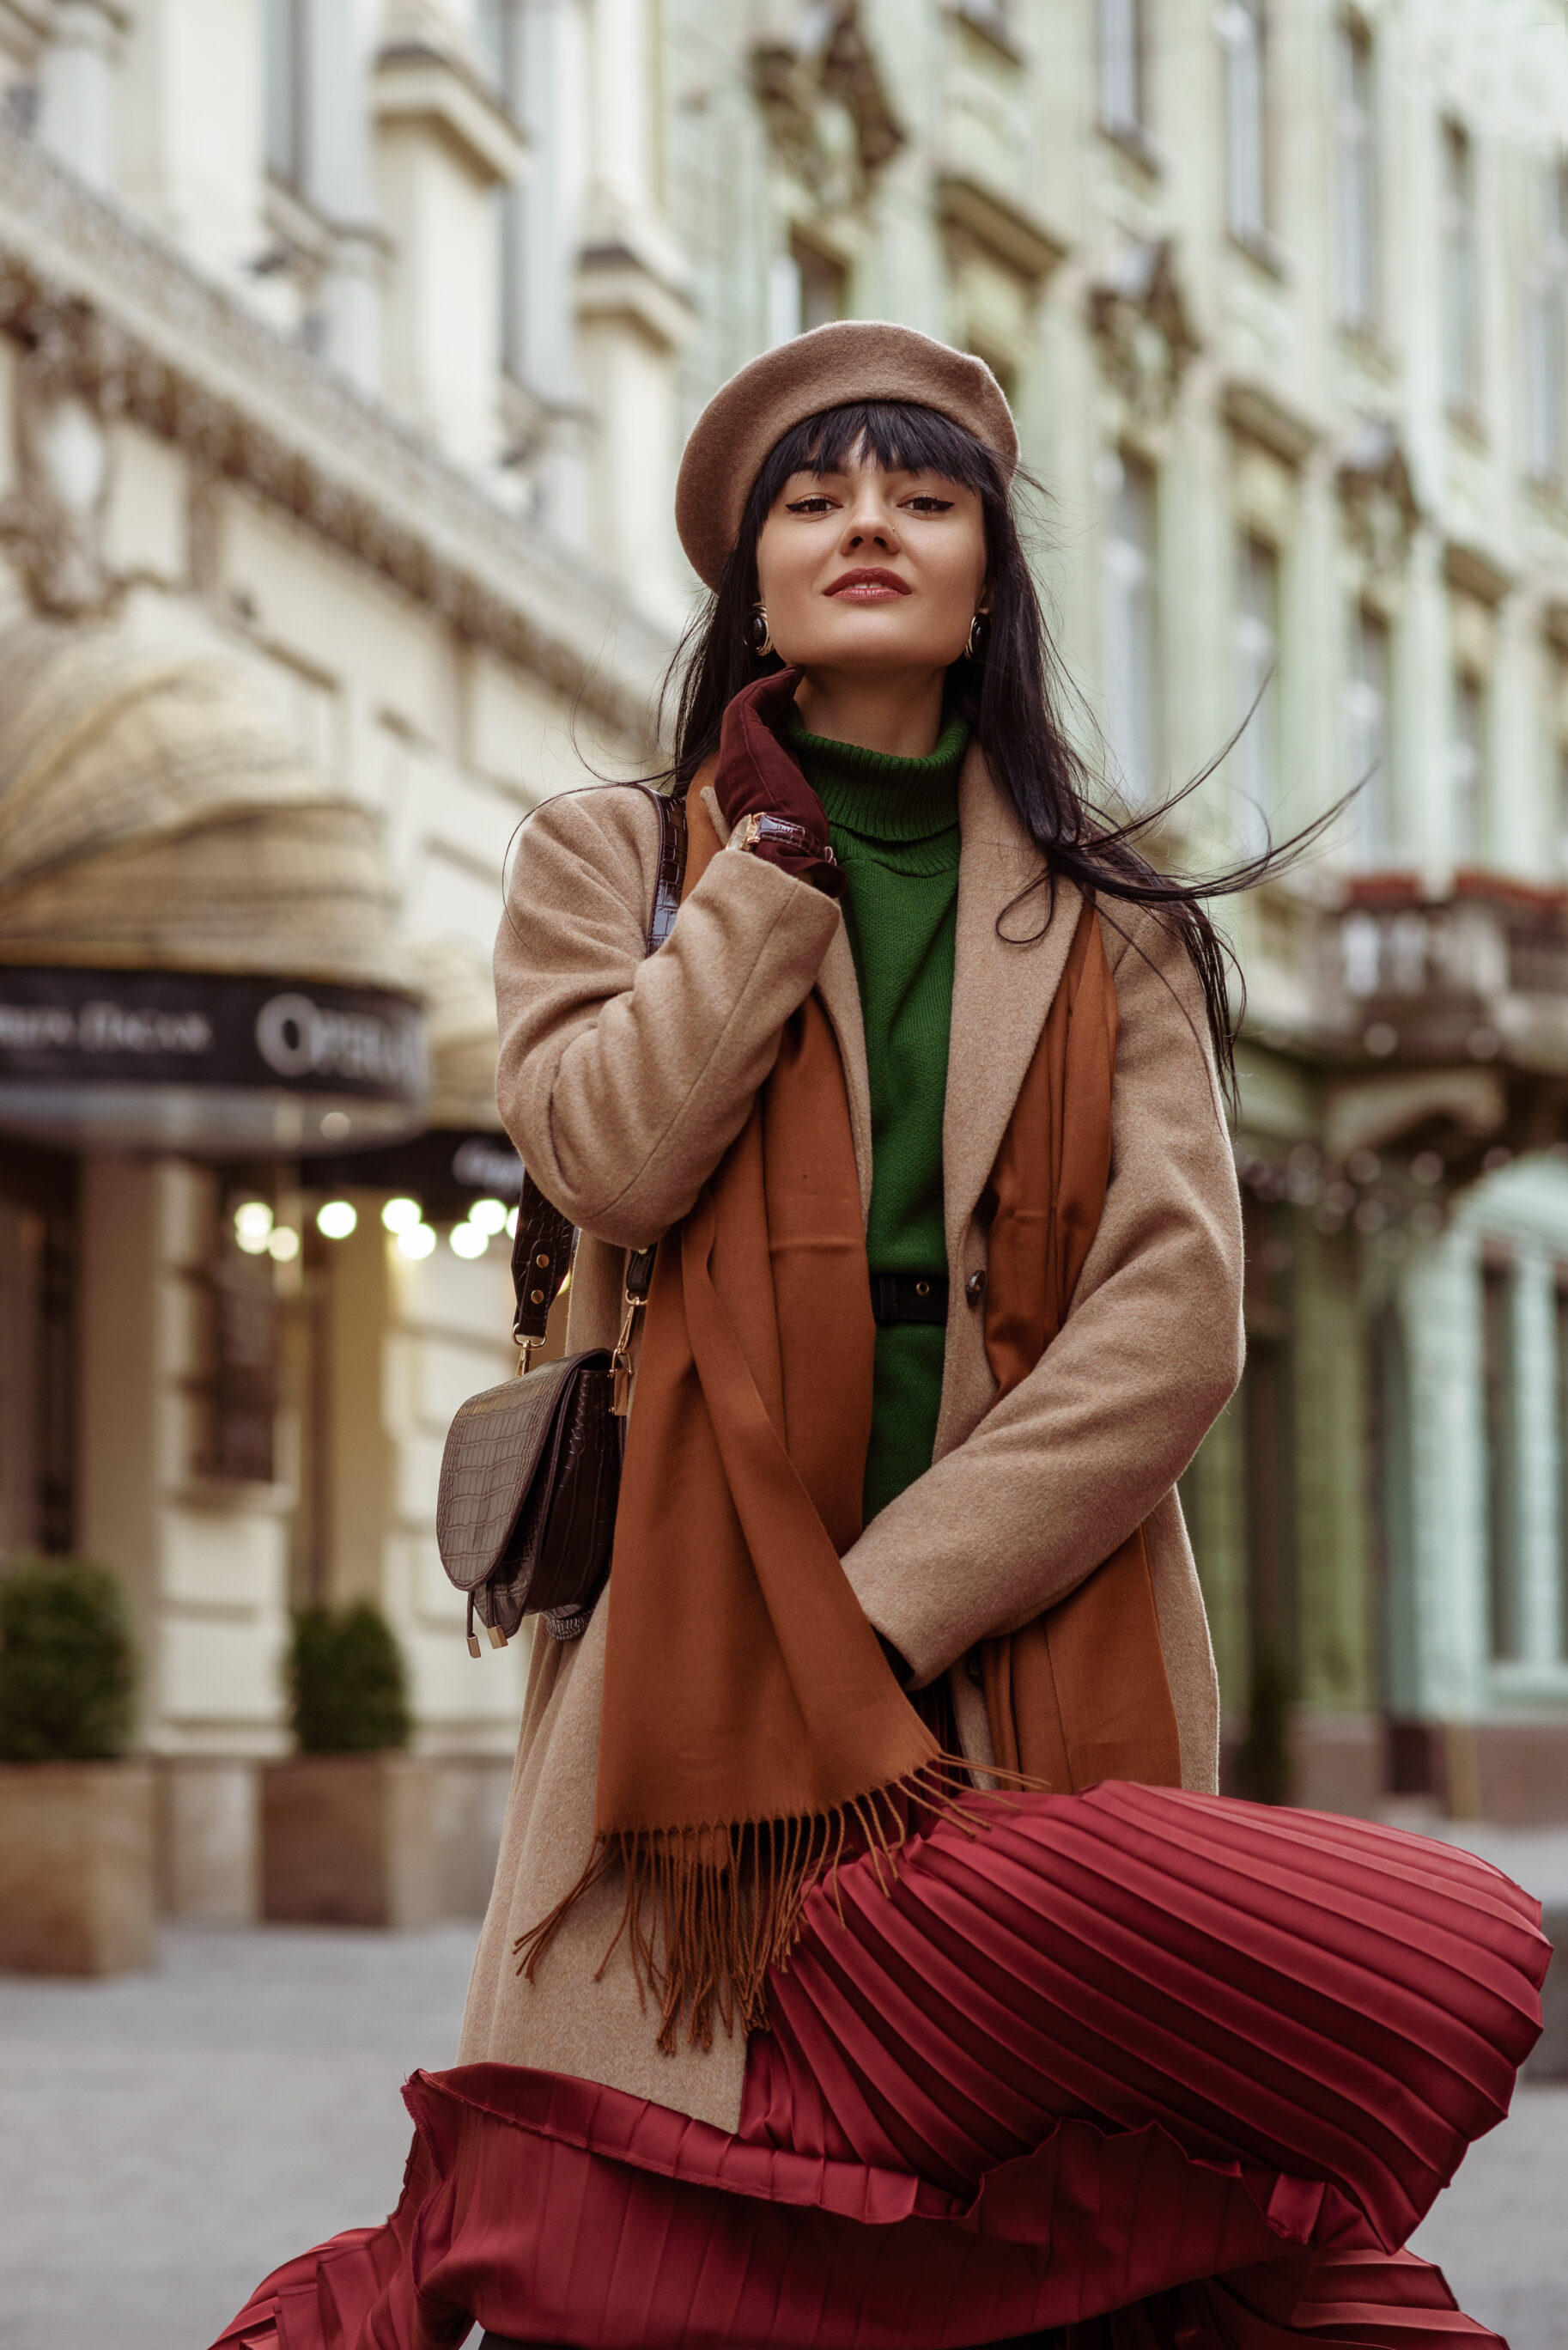 Beige Coat, Beret, Scarf, Pleated Skirt, And Green Turtleneck